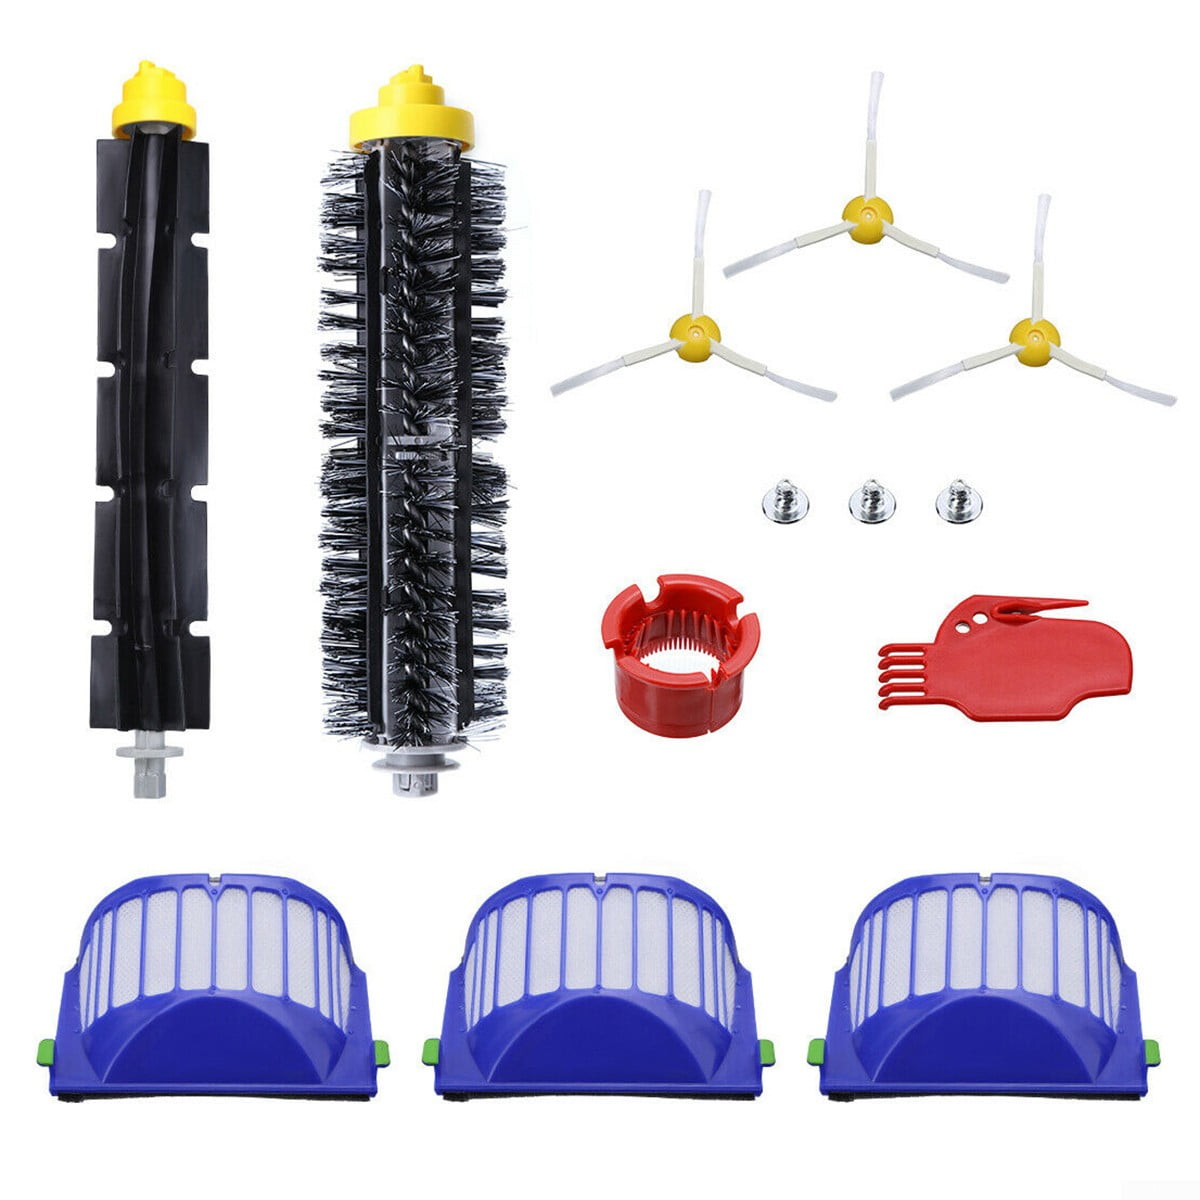 Replacement Filter Brush Accessory Kit For Roomba 600 & Cleaner Robotic 